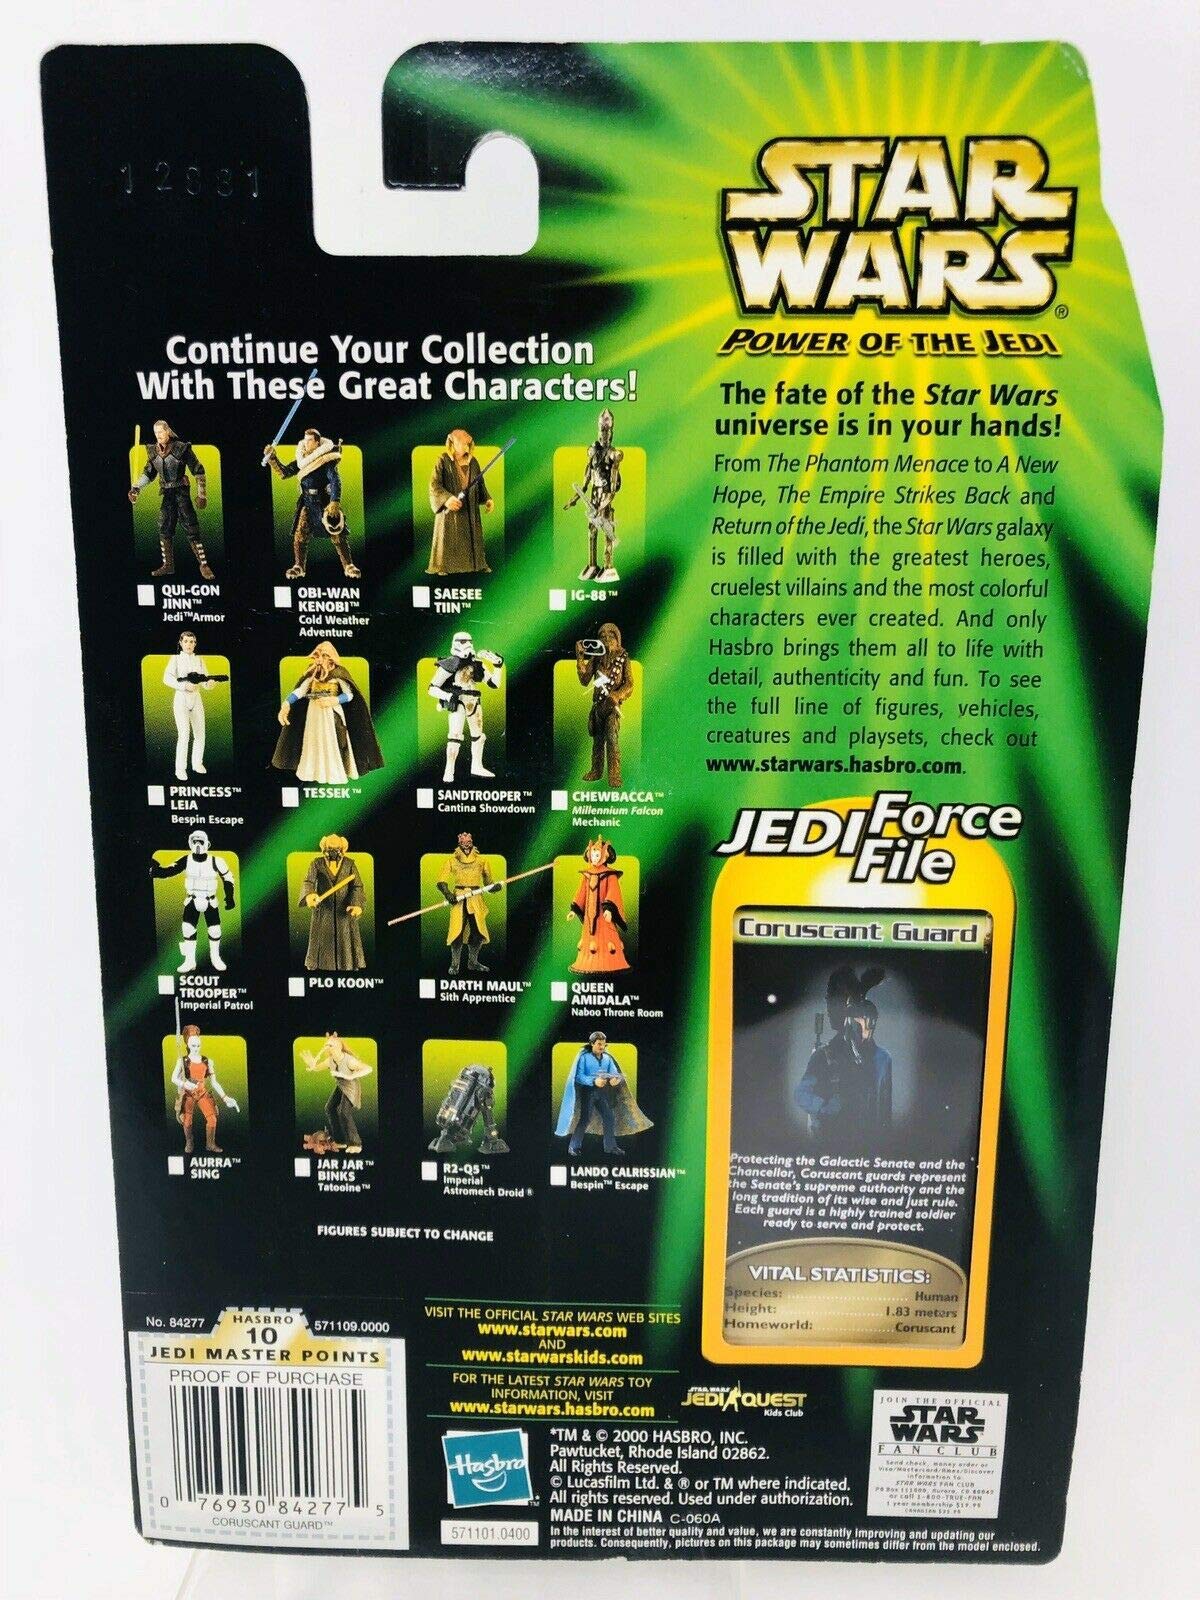 Vintage 2000 Star Wars Power Of The Jedi Coruscant Guard Action Figure